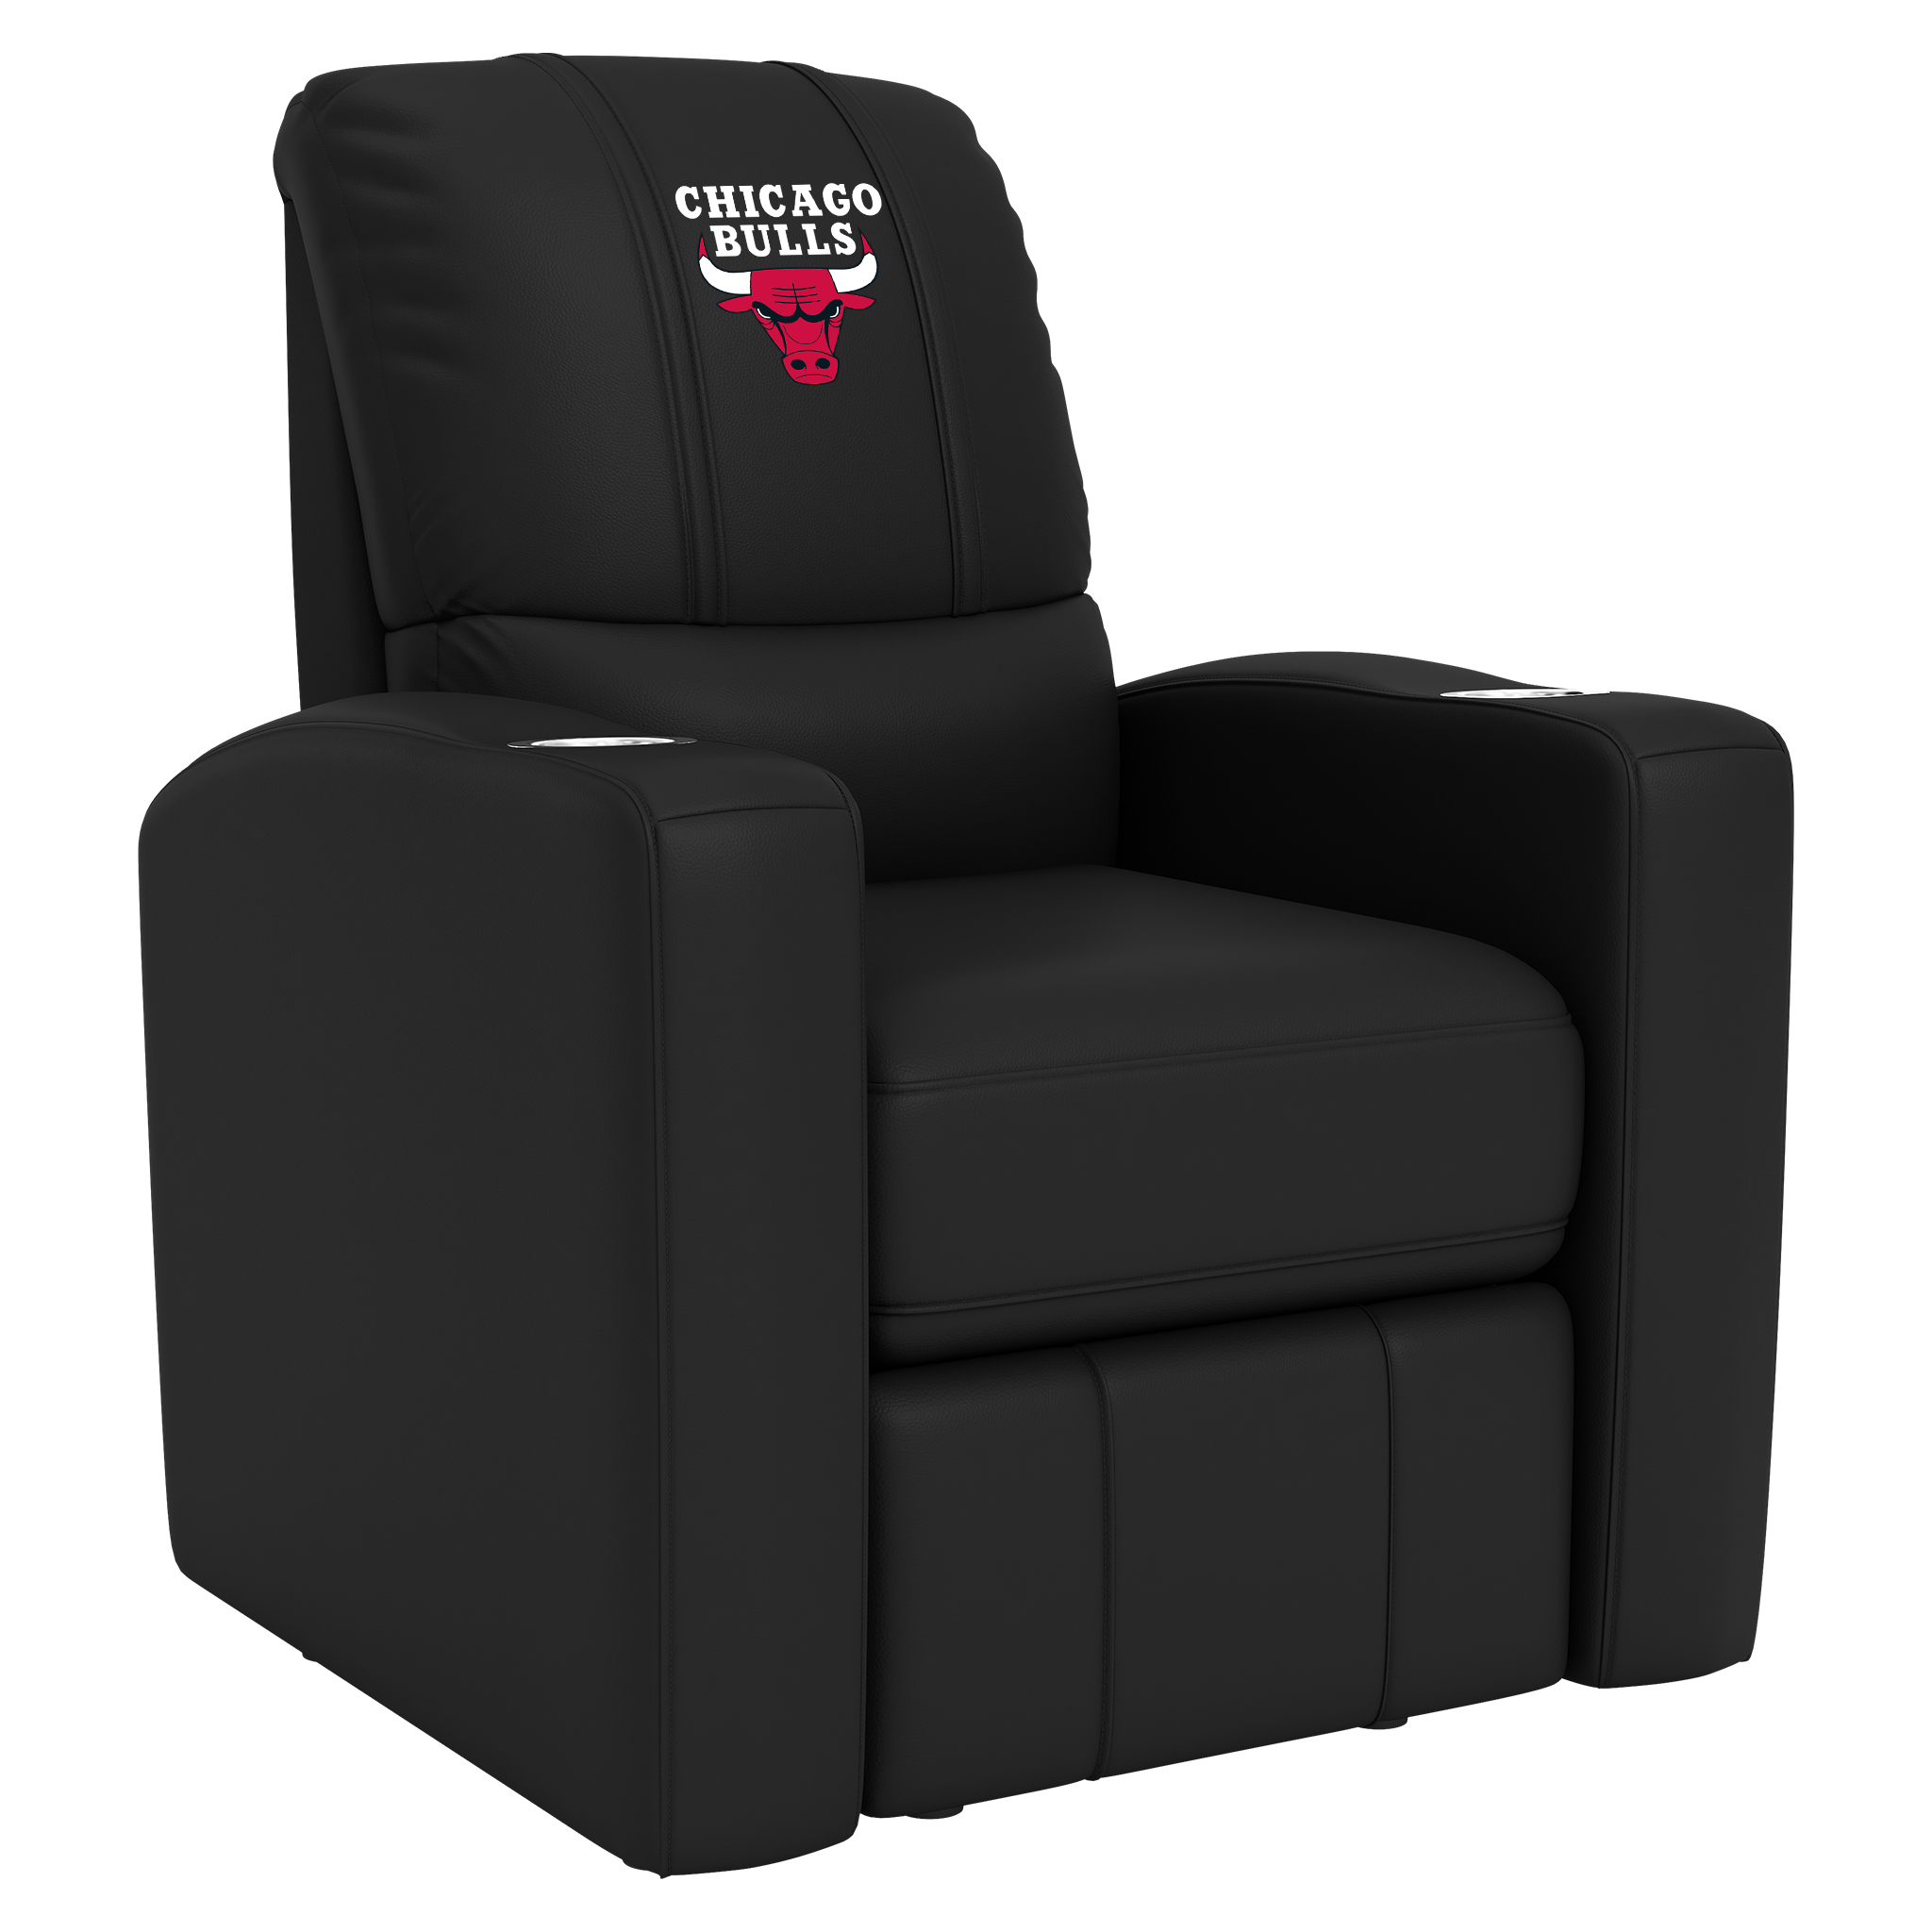 Chicago Bulls Stealth Recliner with Chicago Bulls Logo